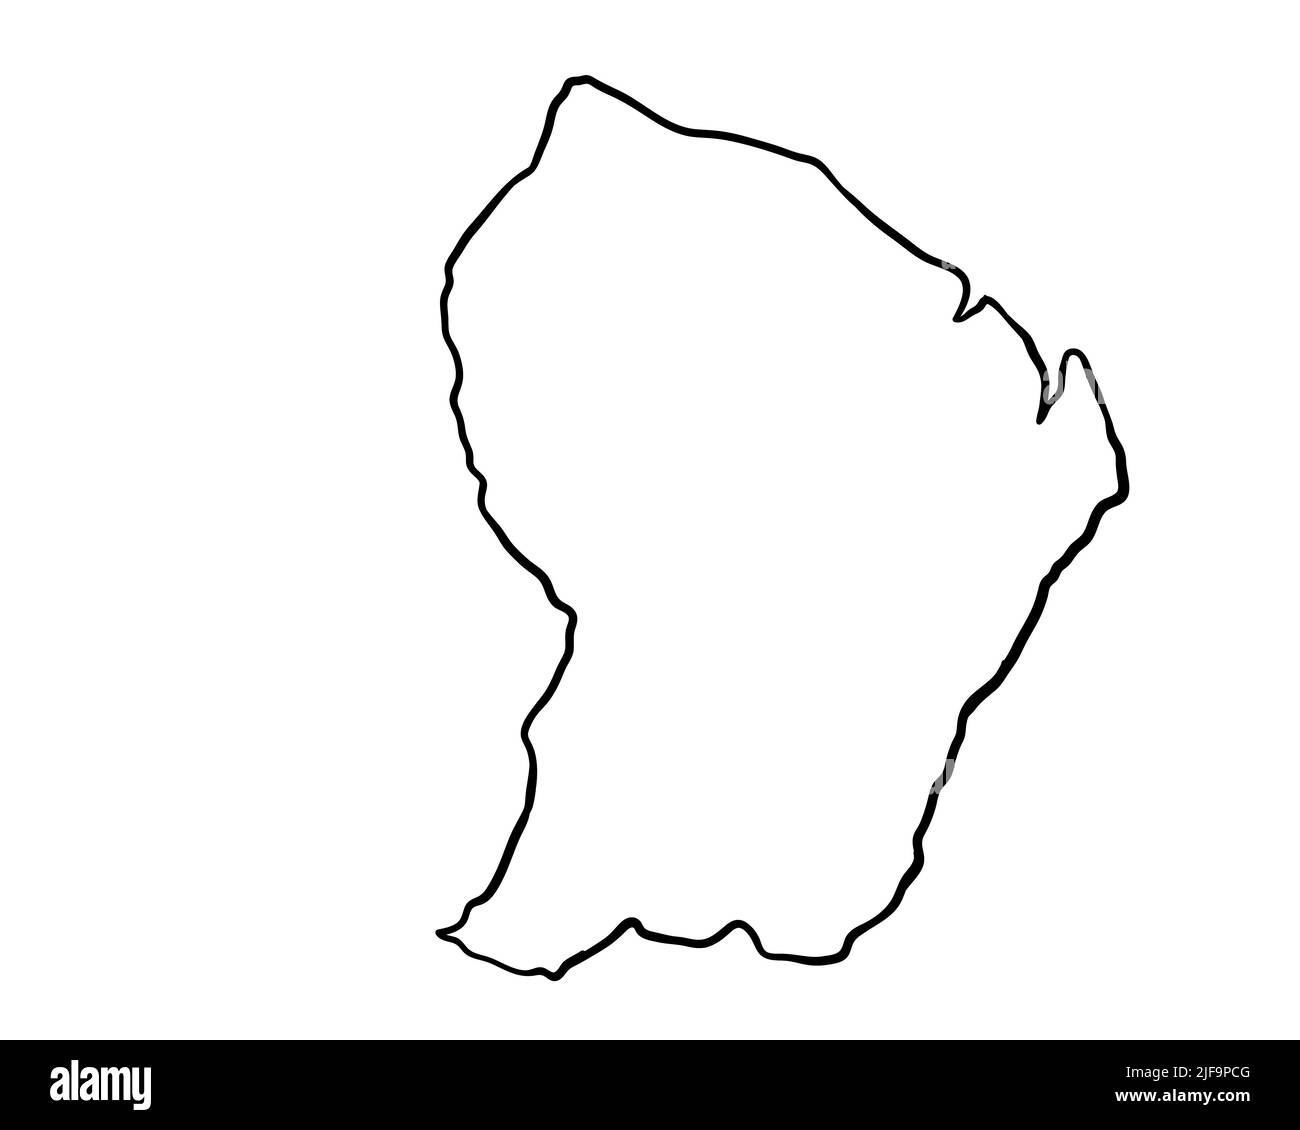 French Guiana - Hand-Drawn Map lllustration Stock Photo